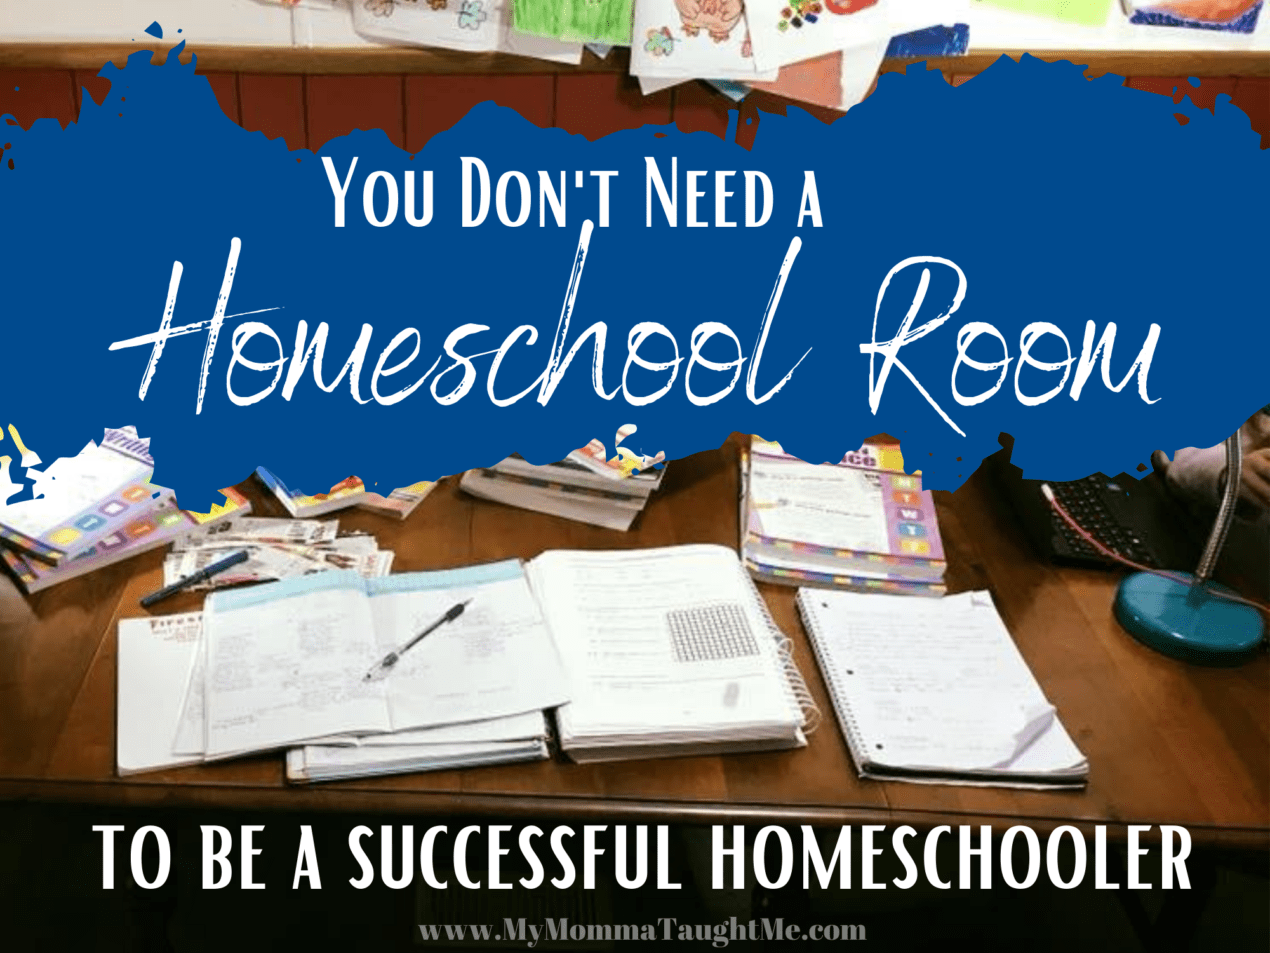 You Don't Need A Homeschool Room To Be A Successful Homeschooler